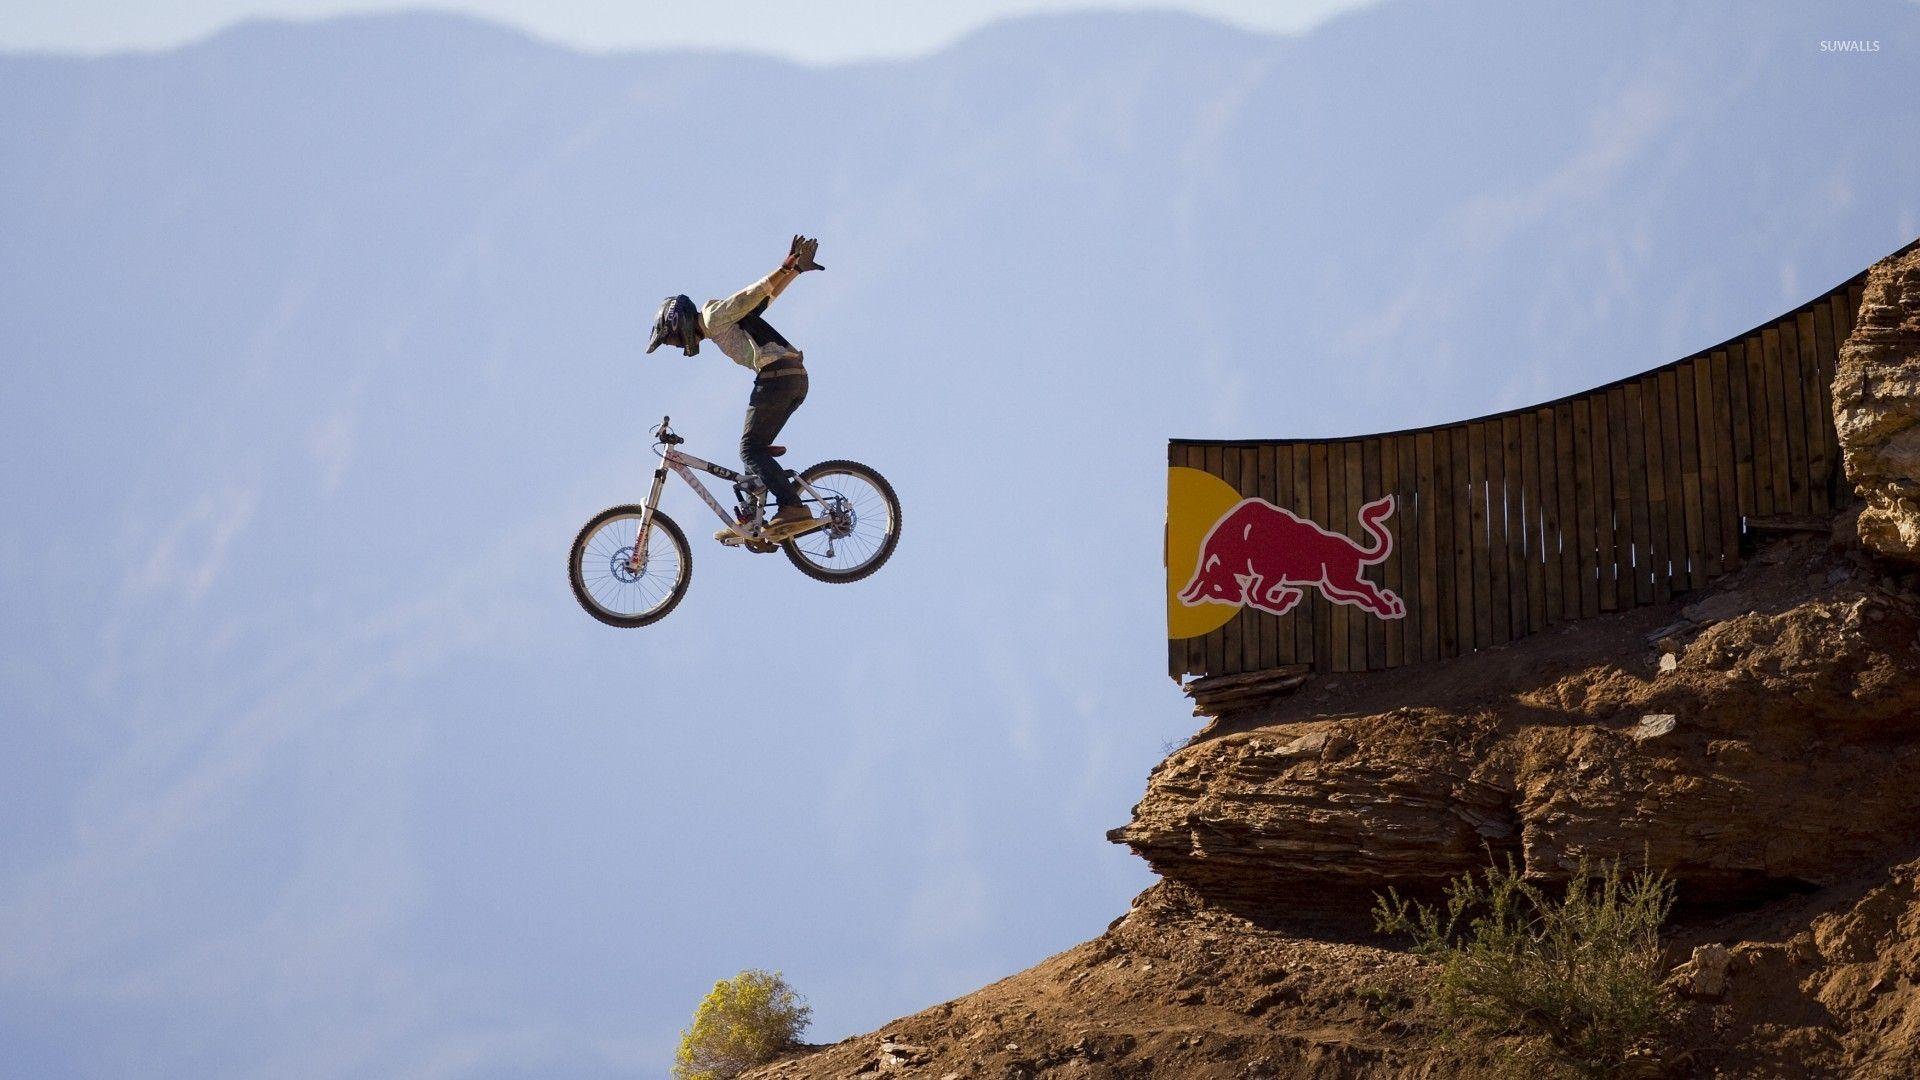 Red Bull Rampage Wallpapers Wallpaper Cave